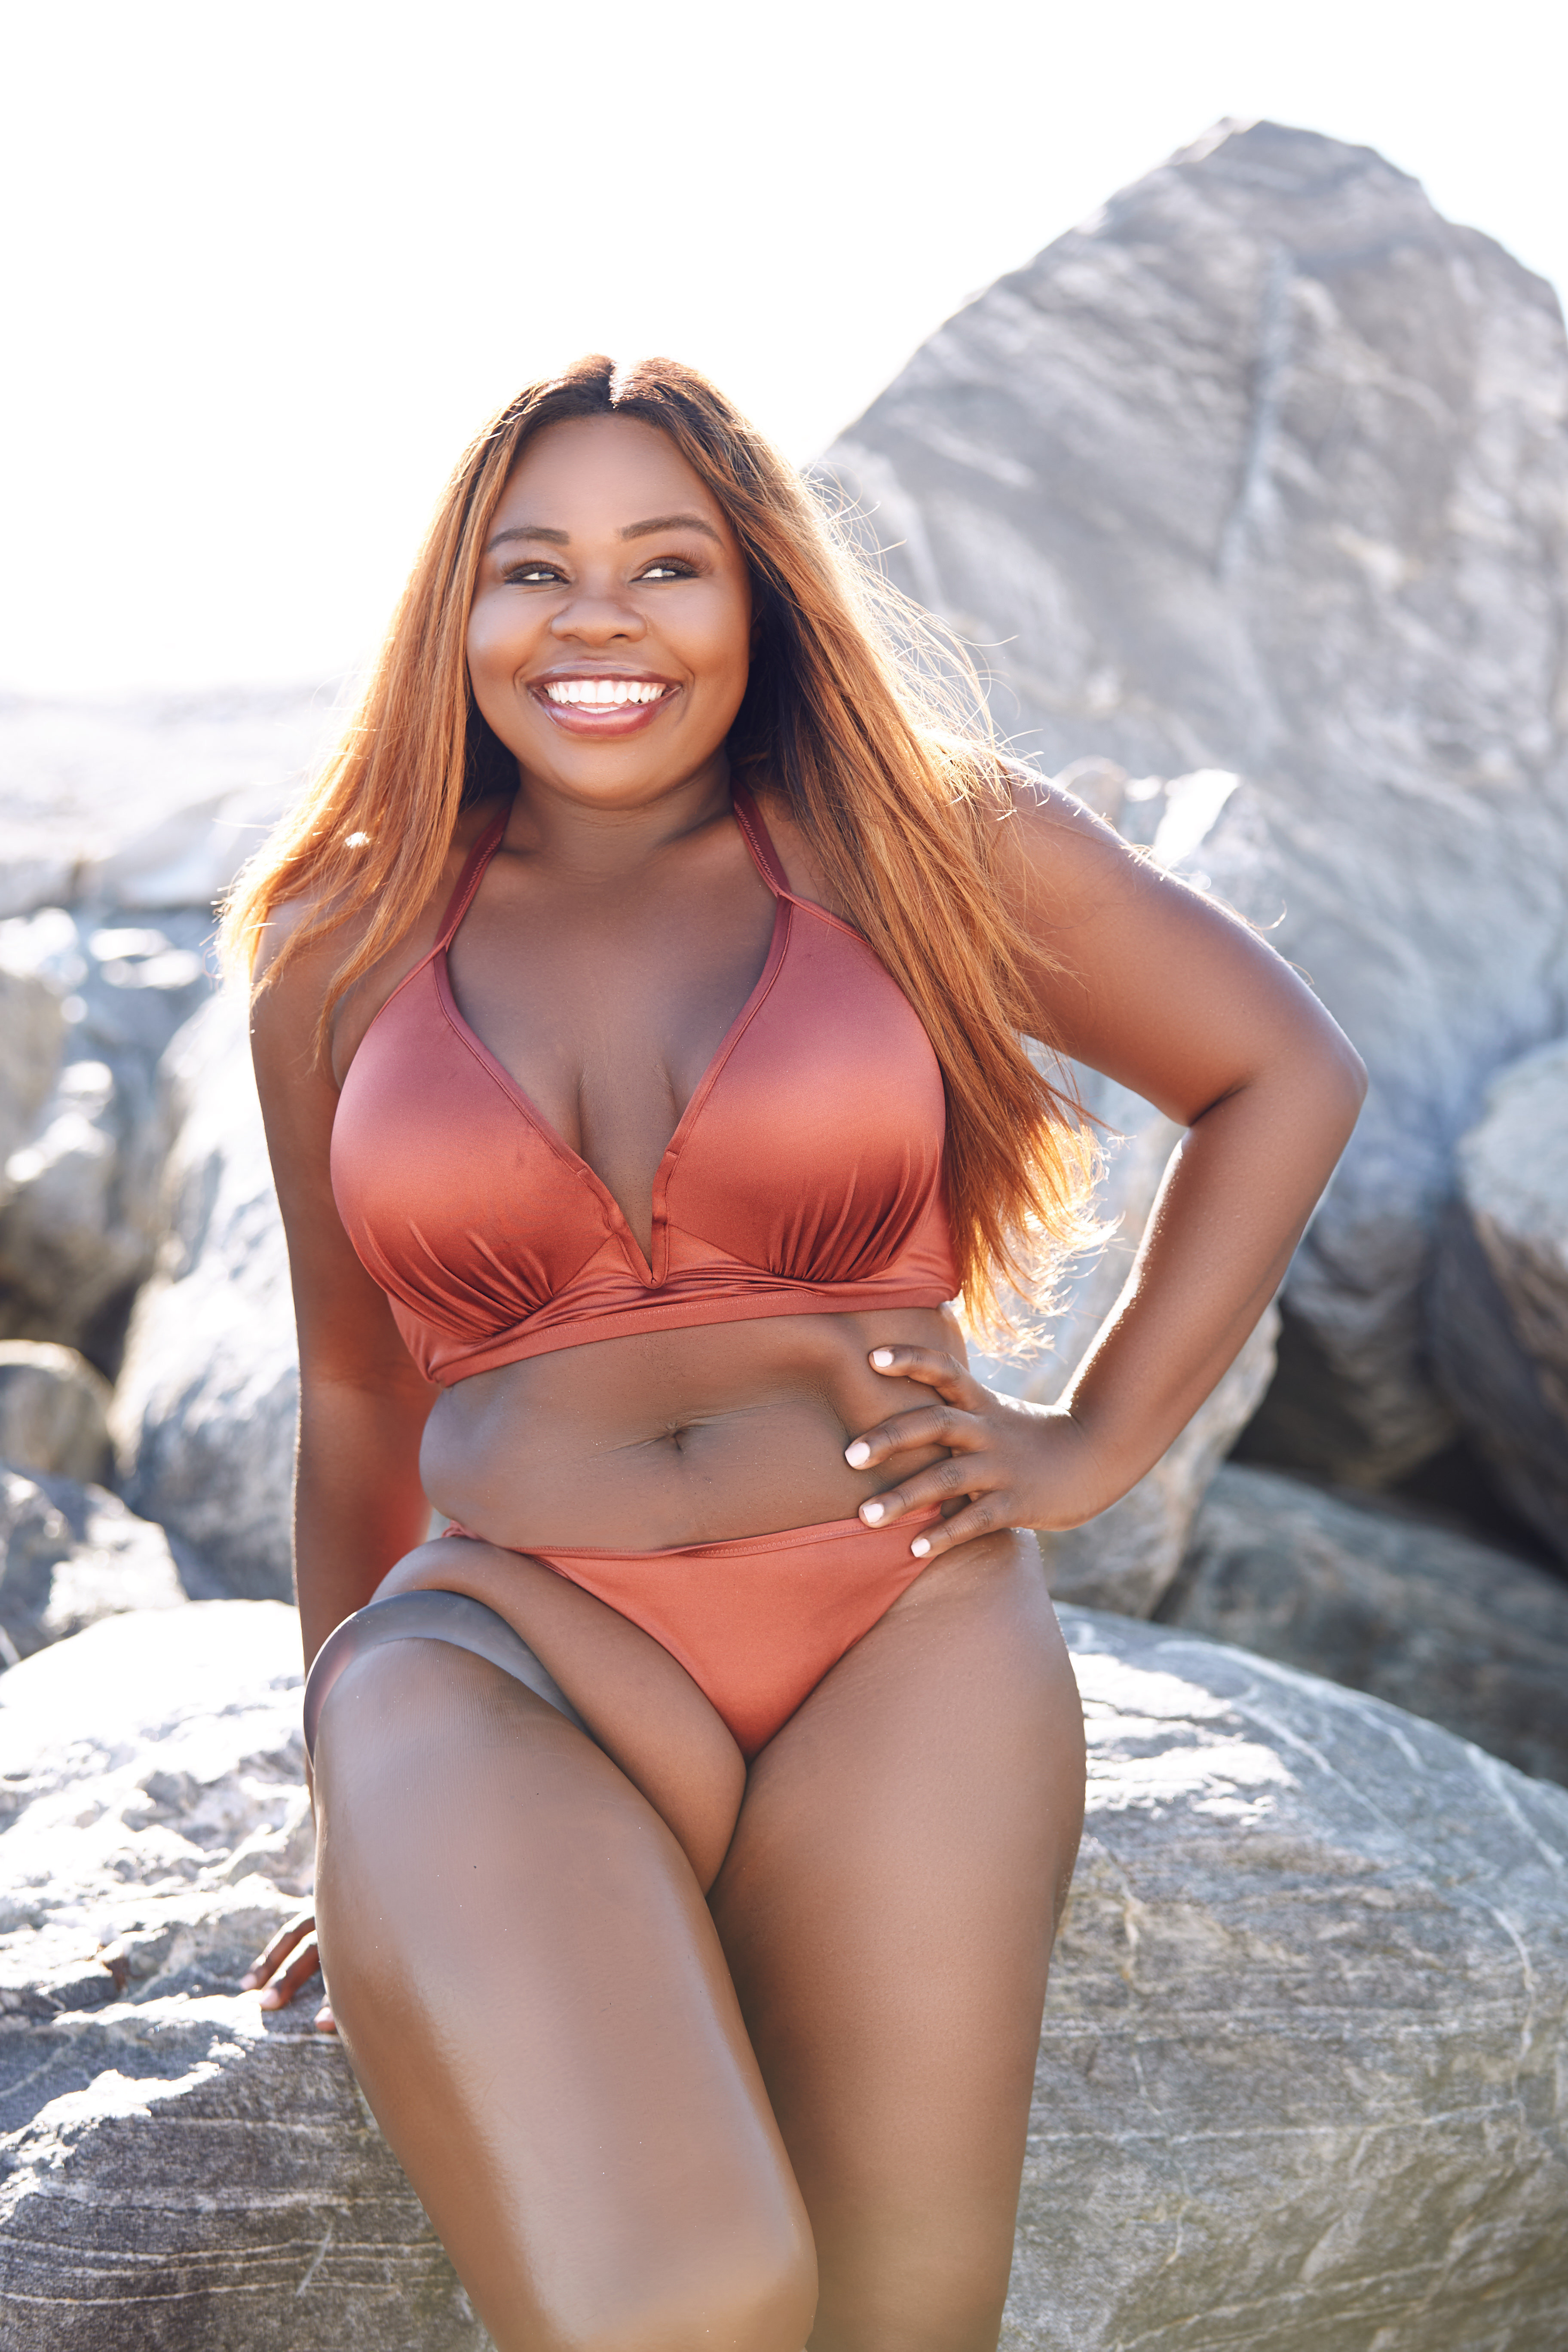 The Beautiful Thing That Happened When This Amputee Posed In A Bathing Suit For The First Time HuffPost HuffPost Personal image